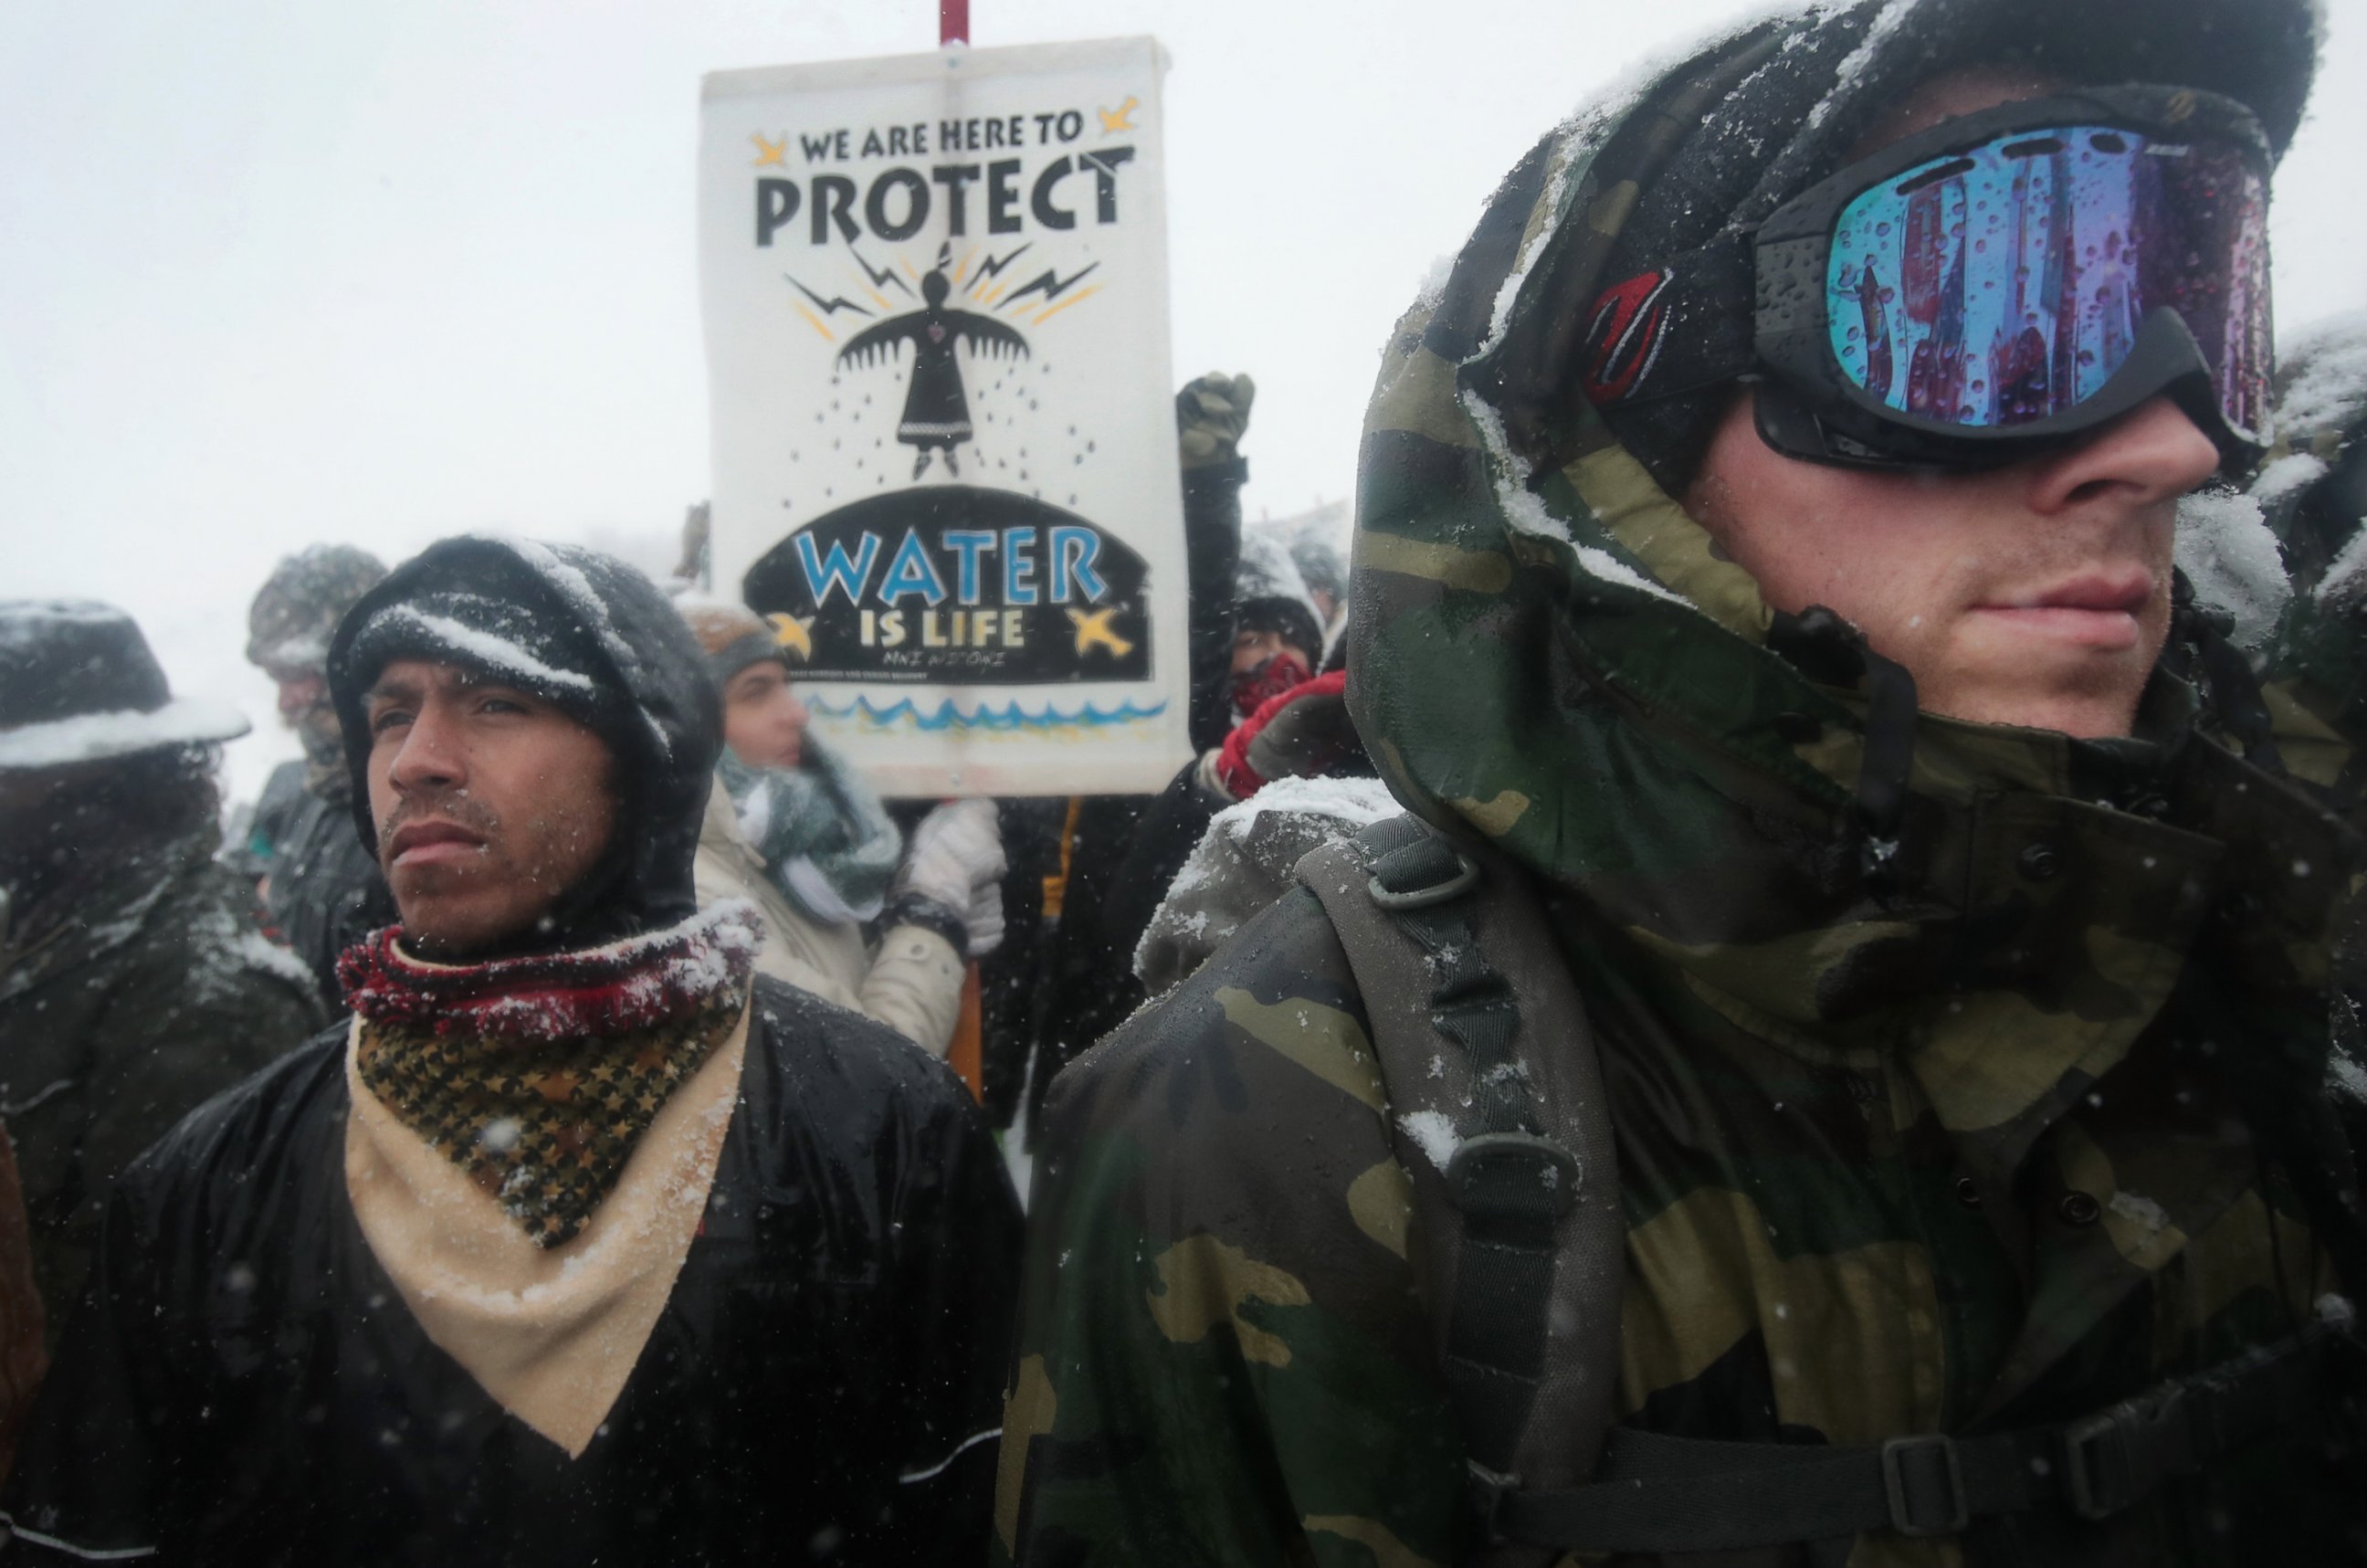 PHOTO: Despite blizzard conditions, military veterans march in support of the "water protectors" at Oceti Sakowin Camp on the edge of the Standing Rock Sioux Reservation, Dec. 5, 2016 outside Cannon Ball, North Dakota. 